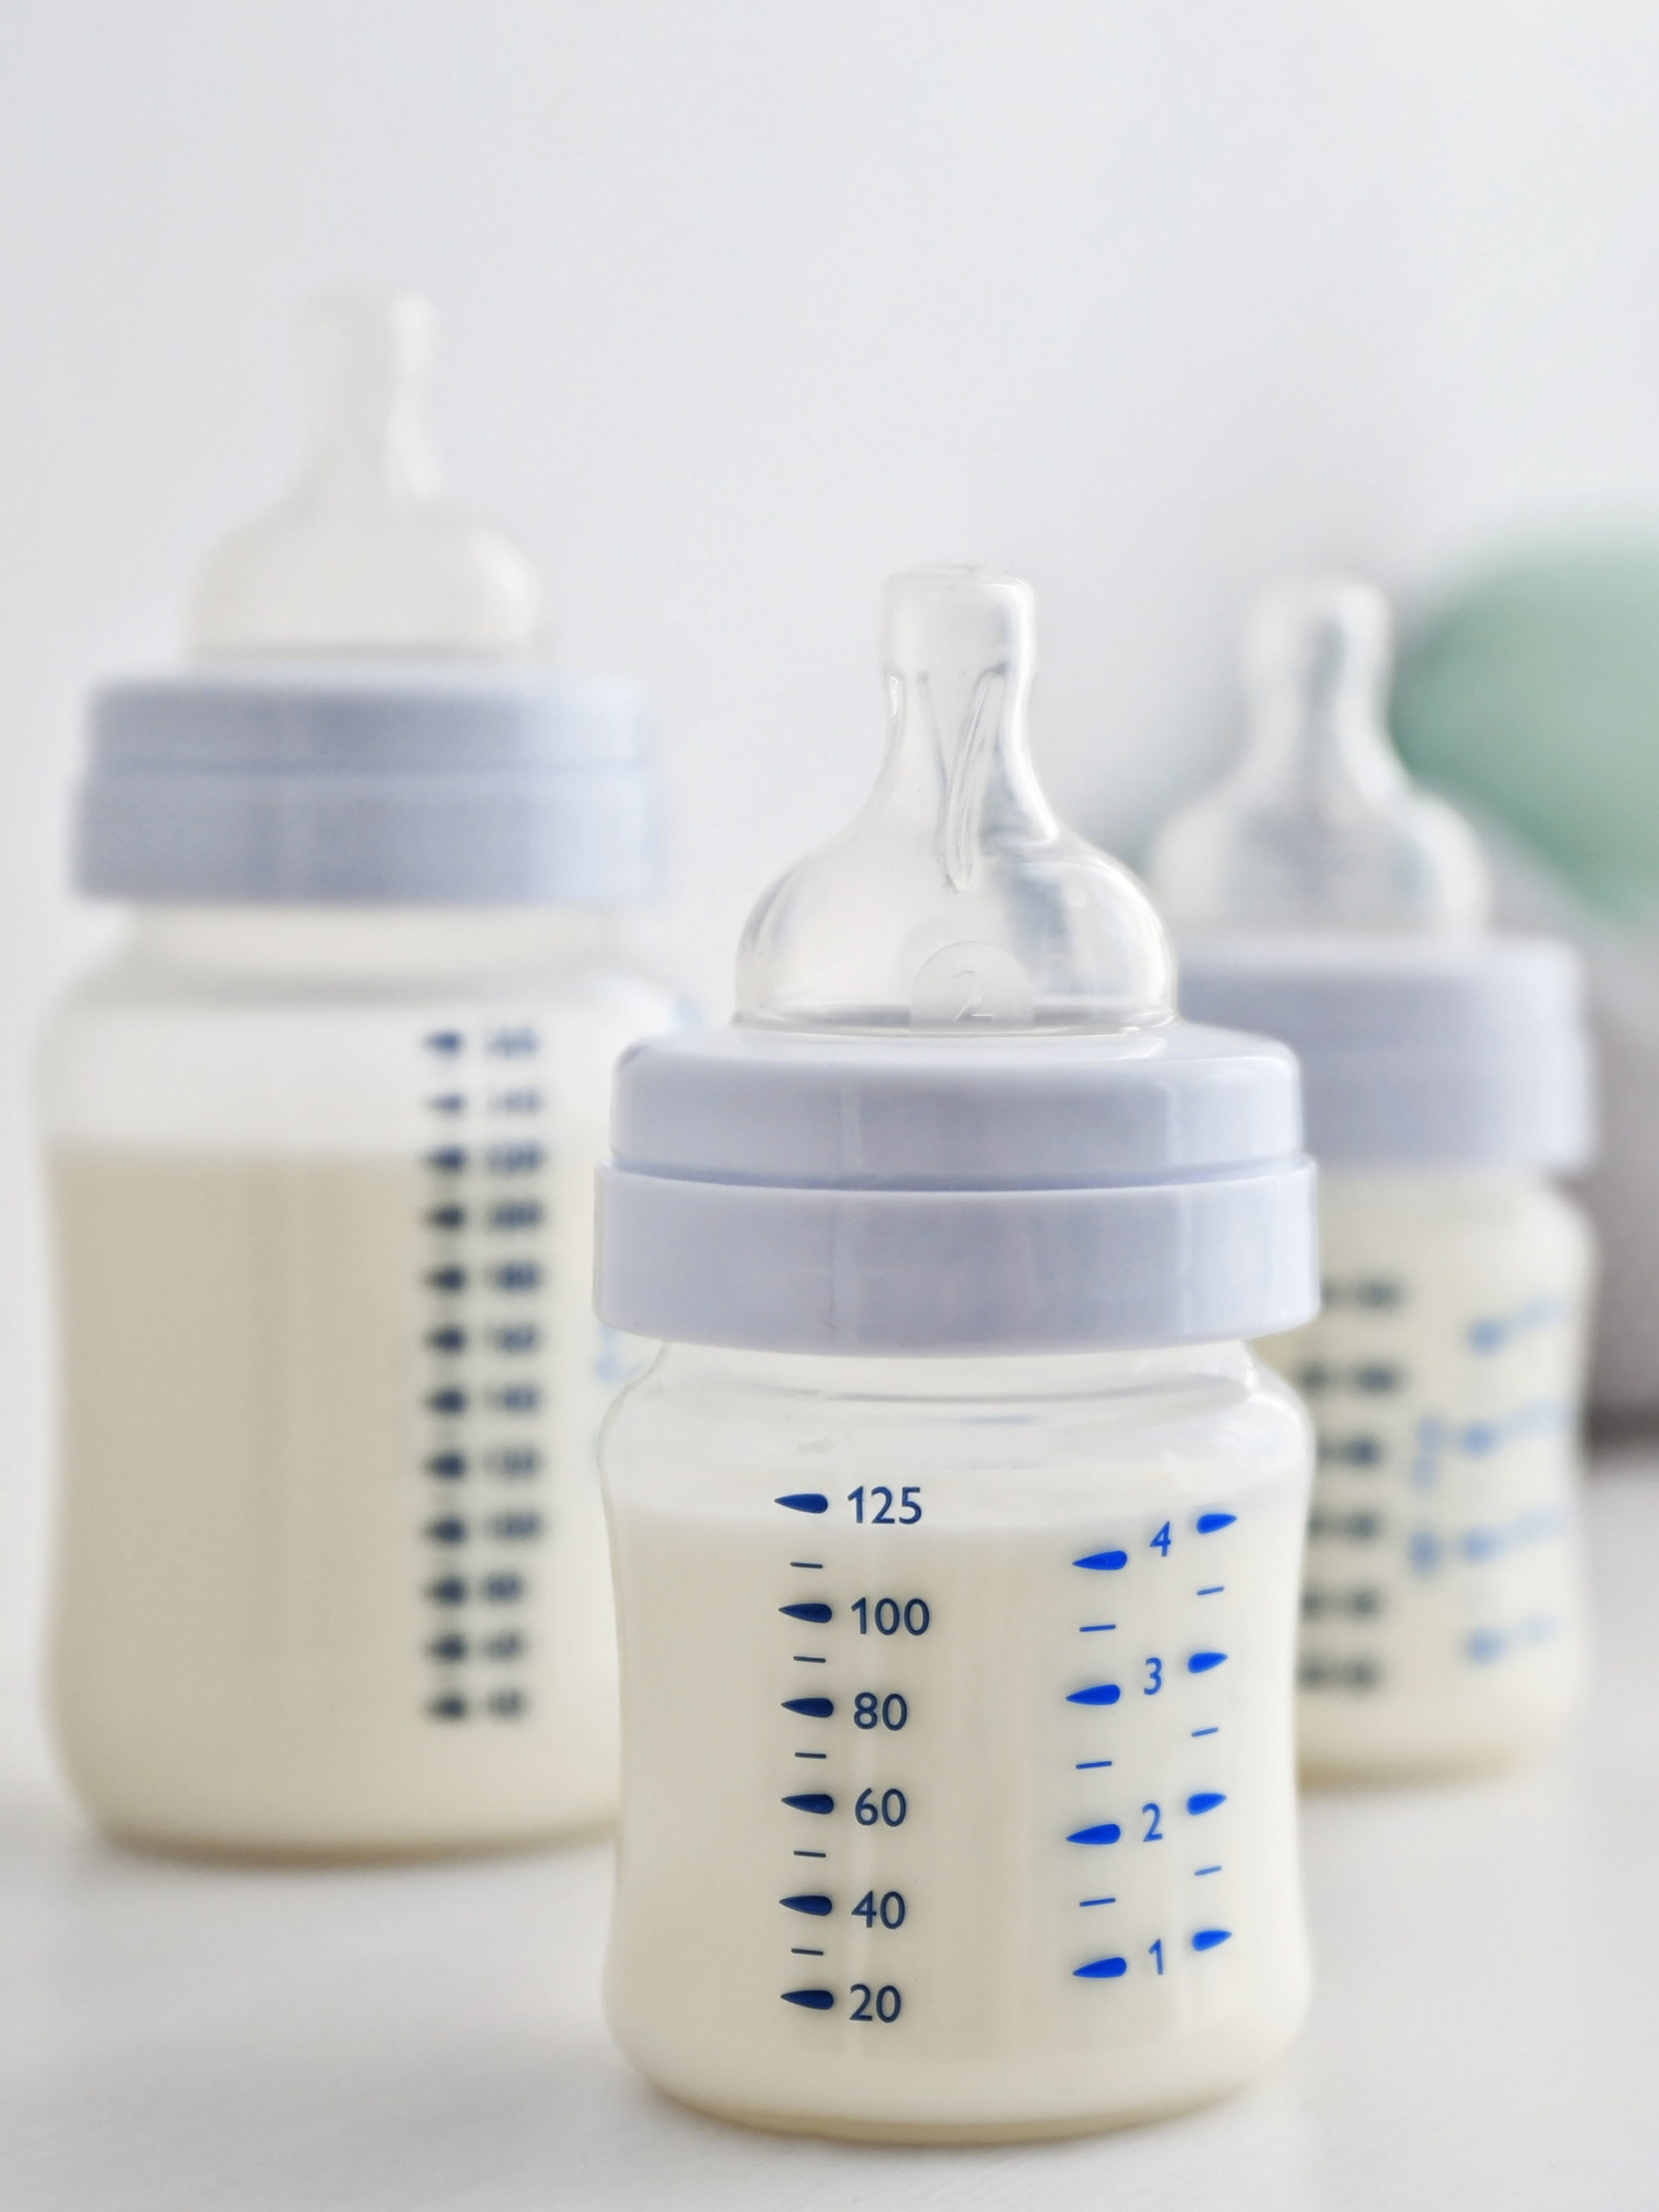 Baby milk bottles and toys on white background